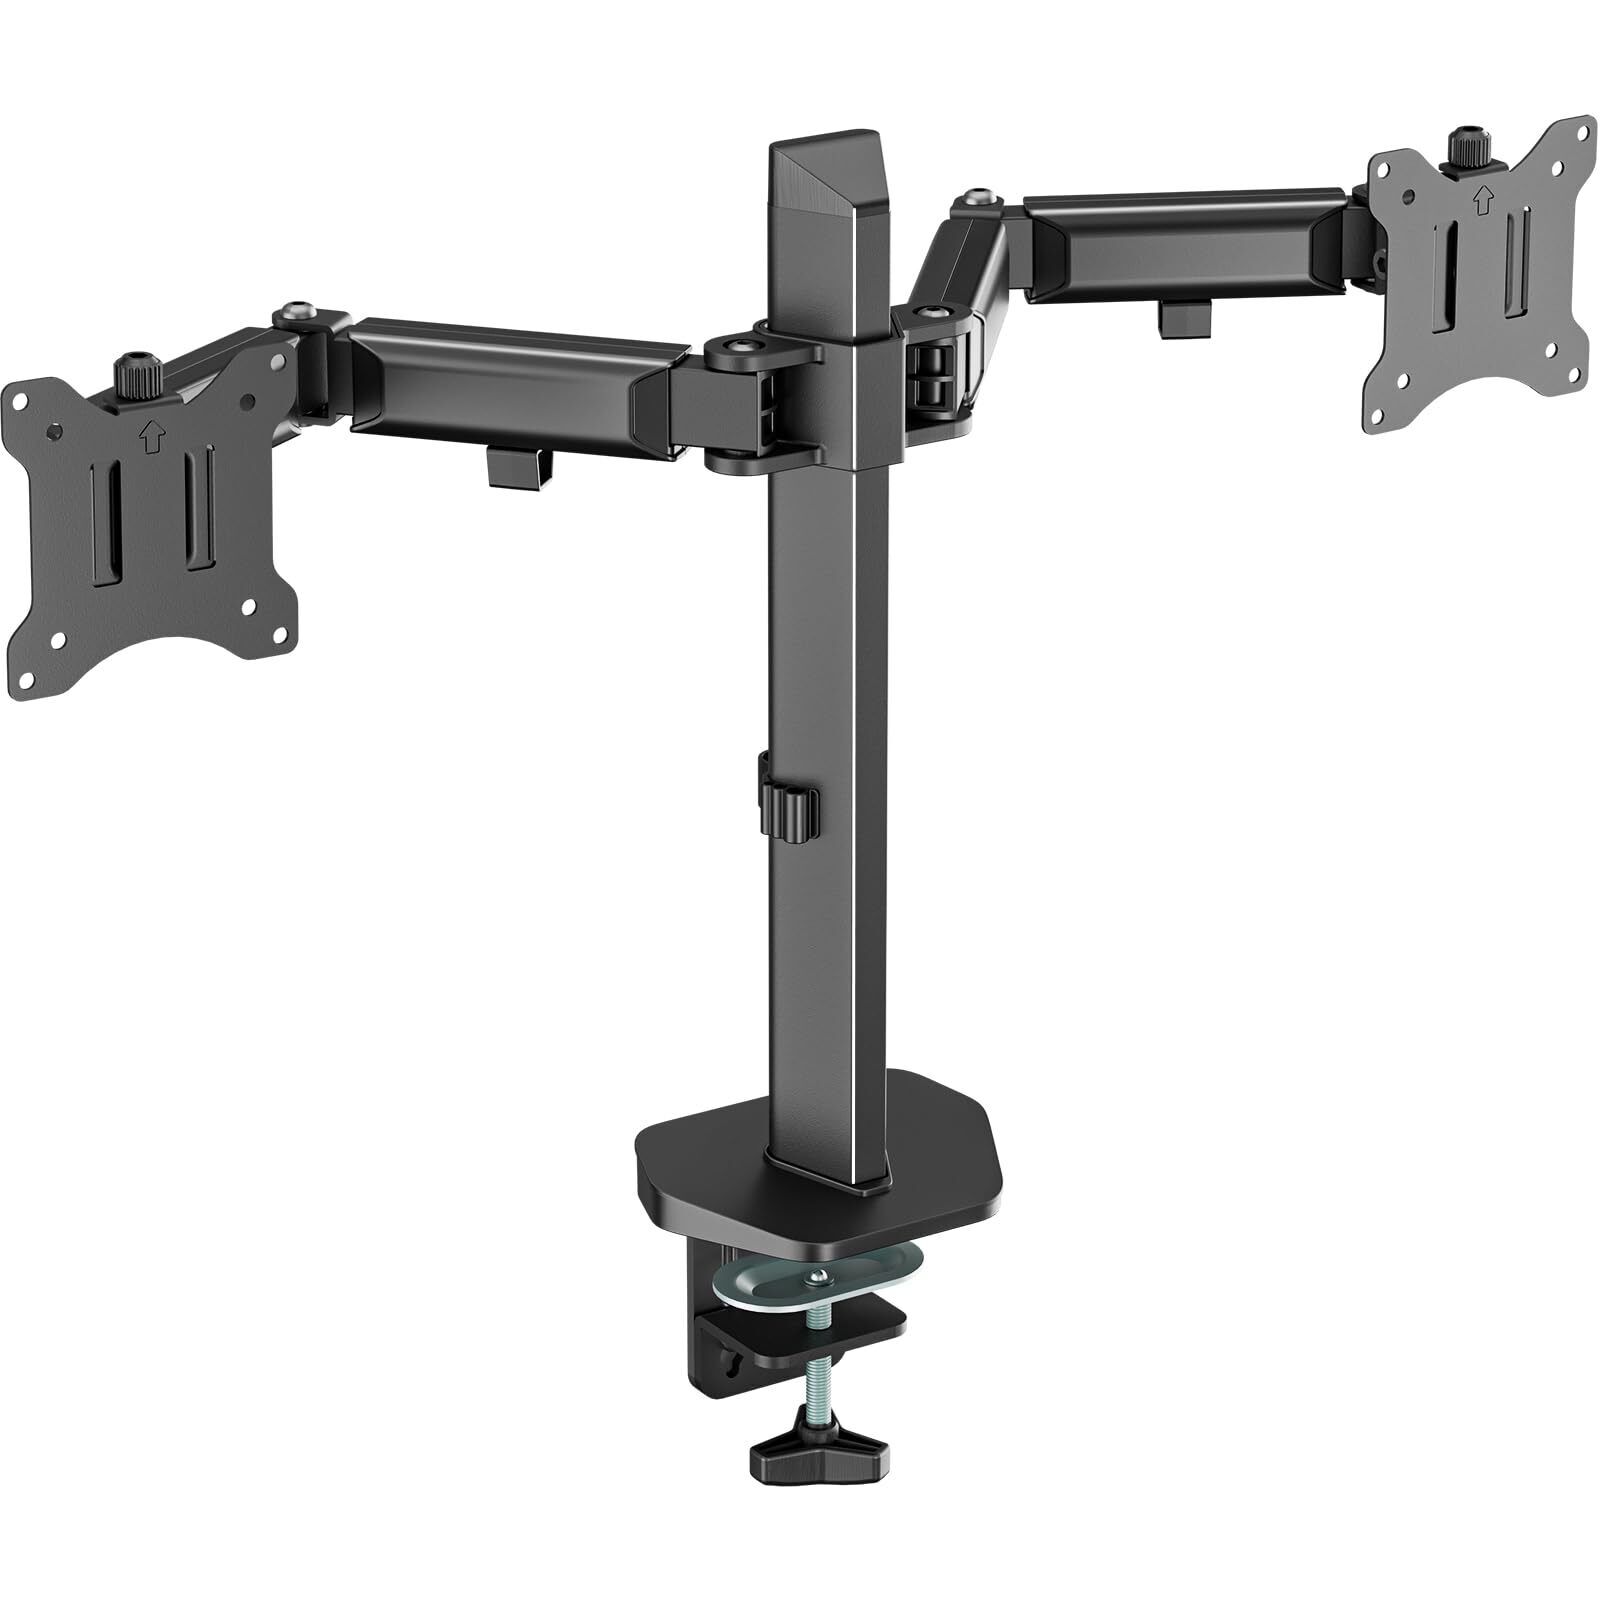 WALI Dual Monitor Mount Monitor Arm Fits 2 Screens up to 32 inch Dual Monitor...